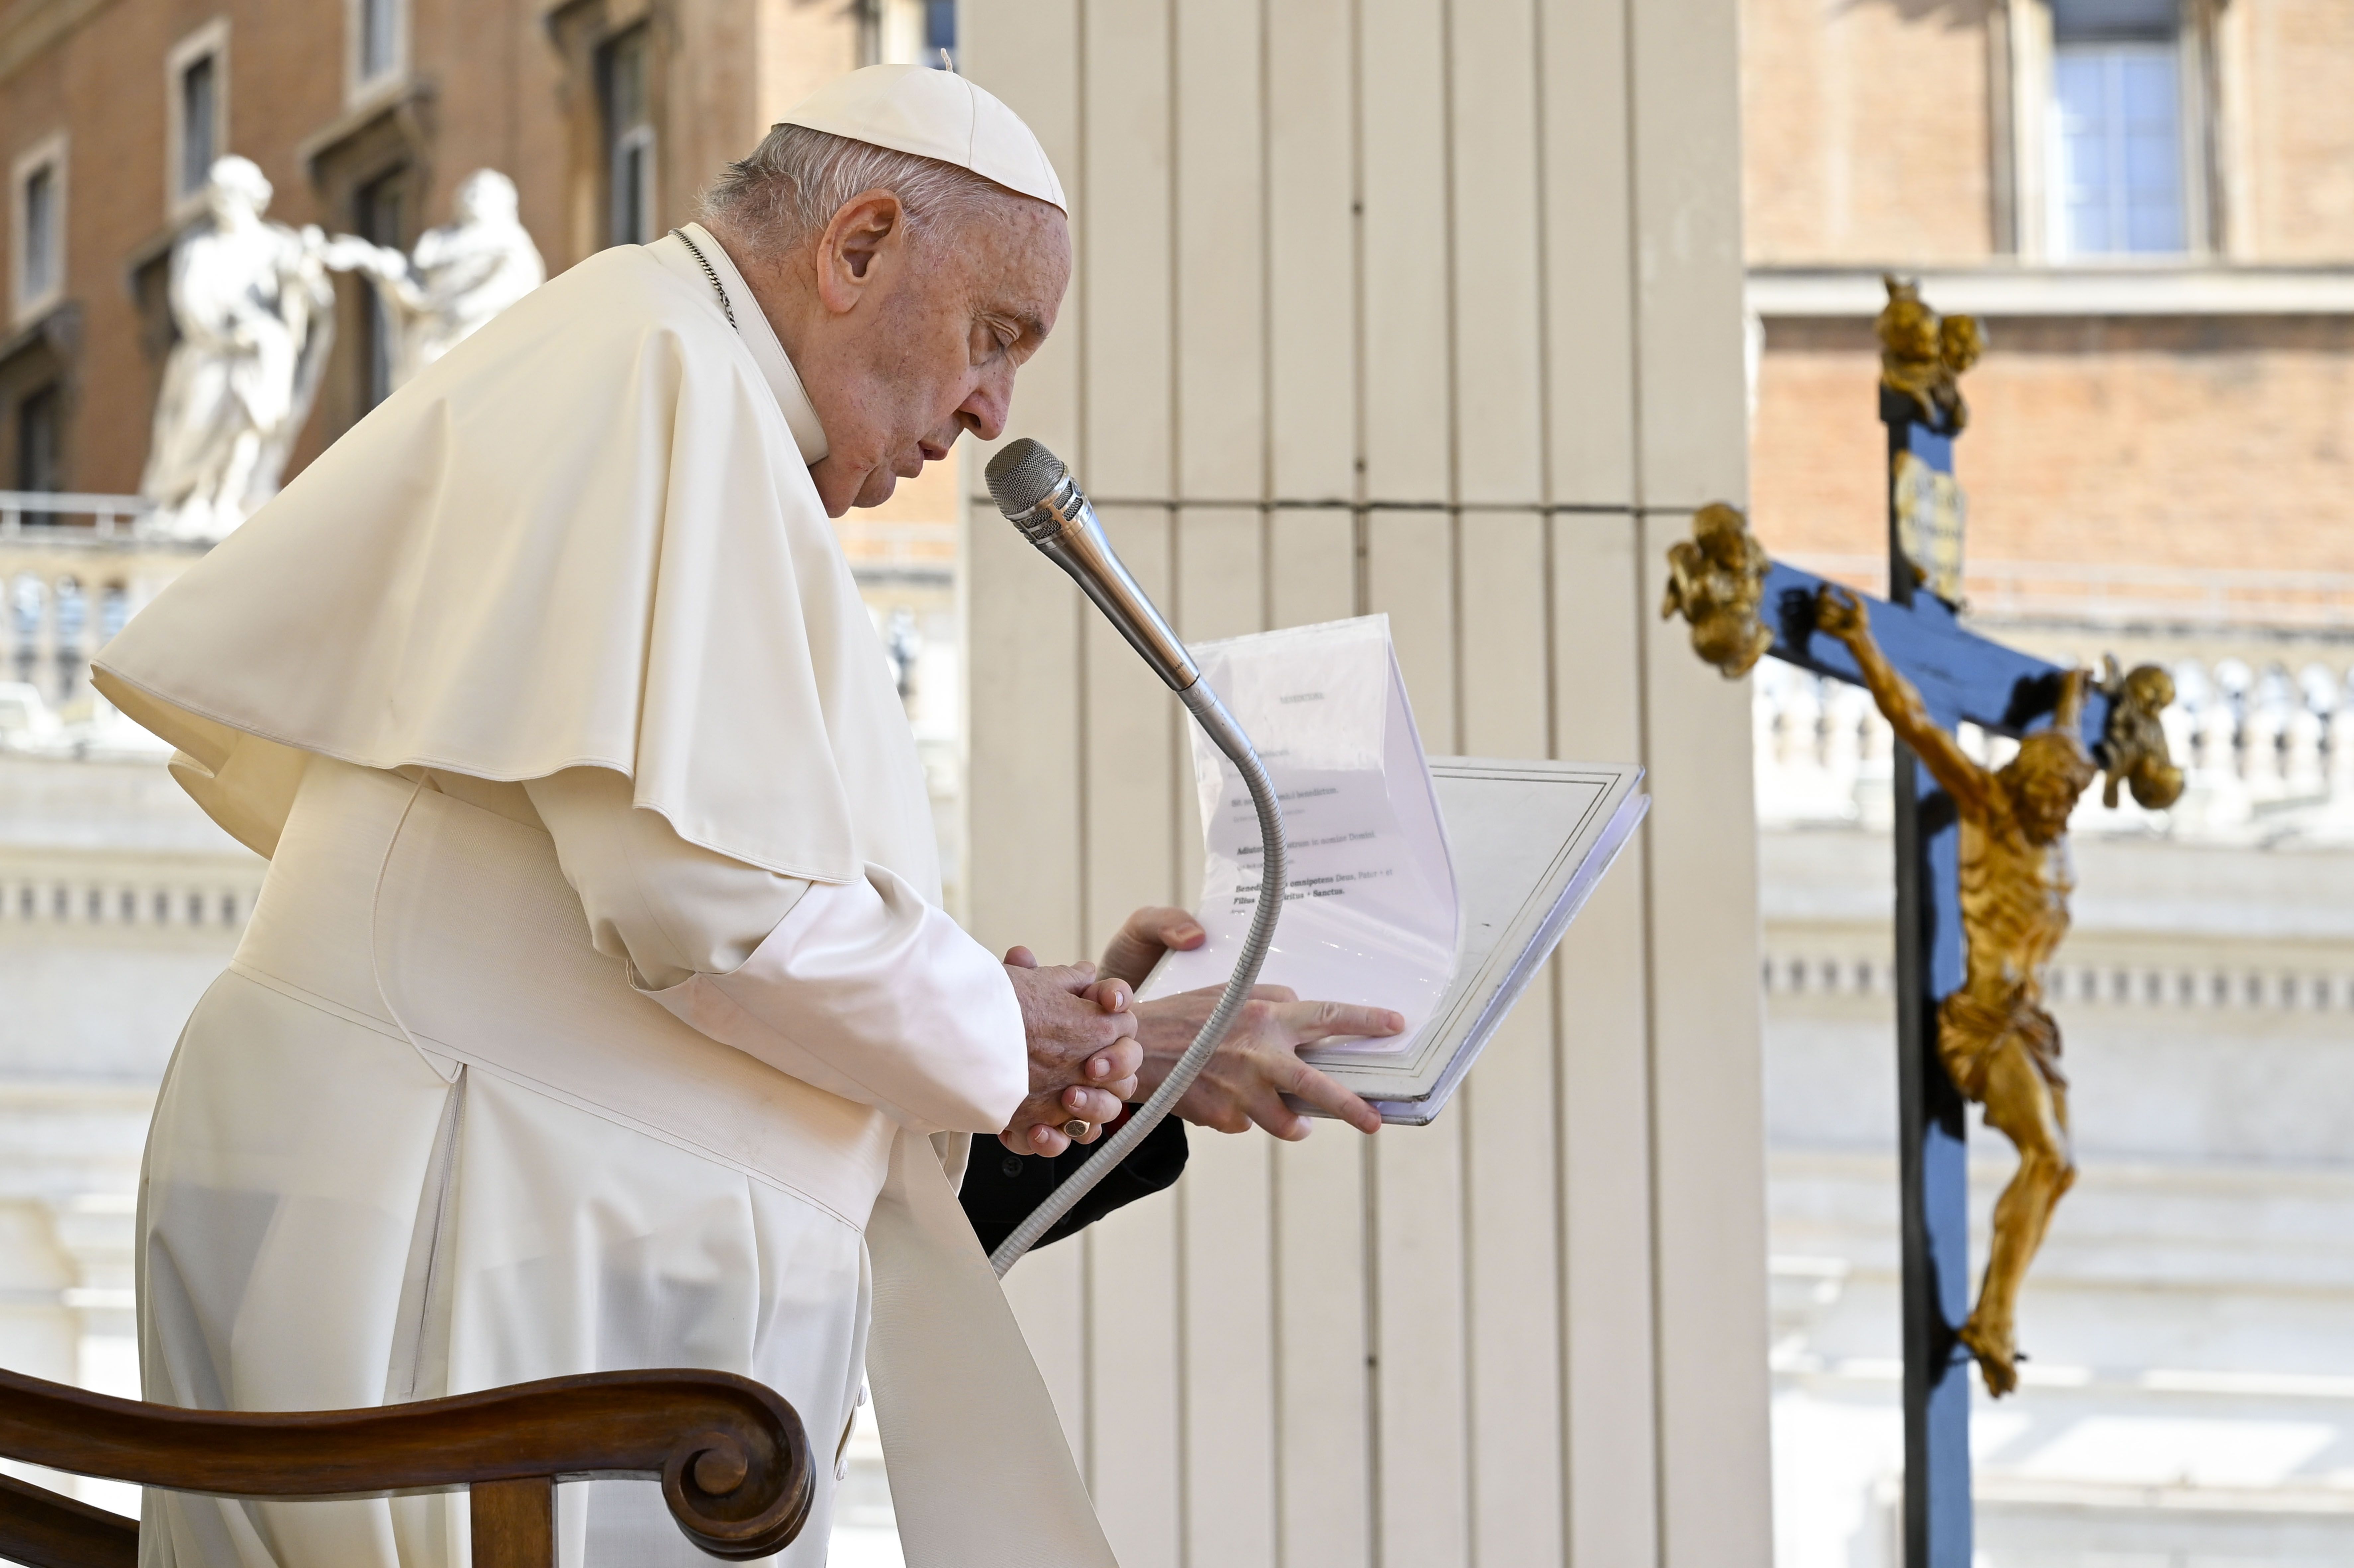 Pope Francis: The temperate person is balanced by both principle and empathy